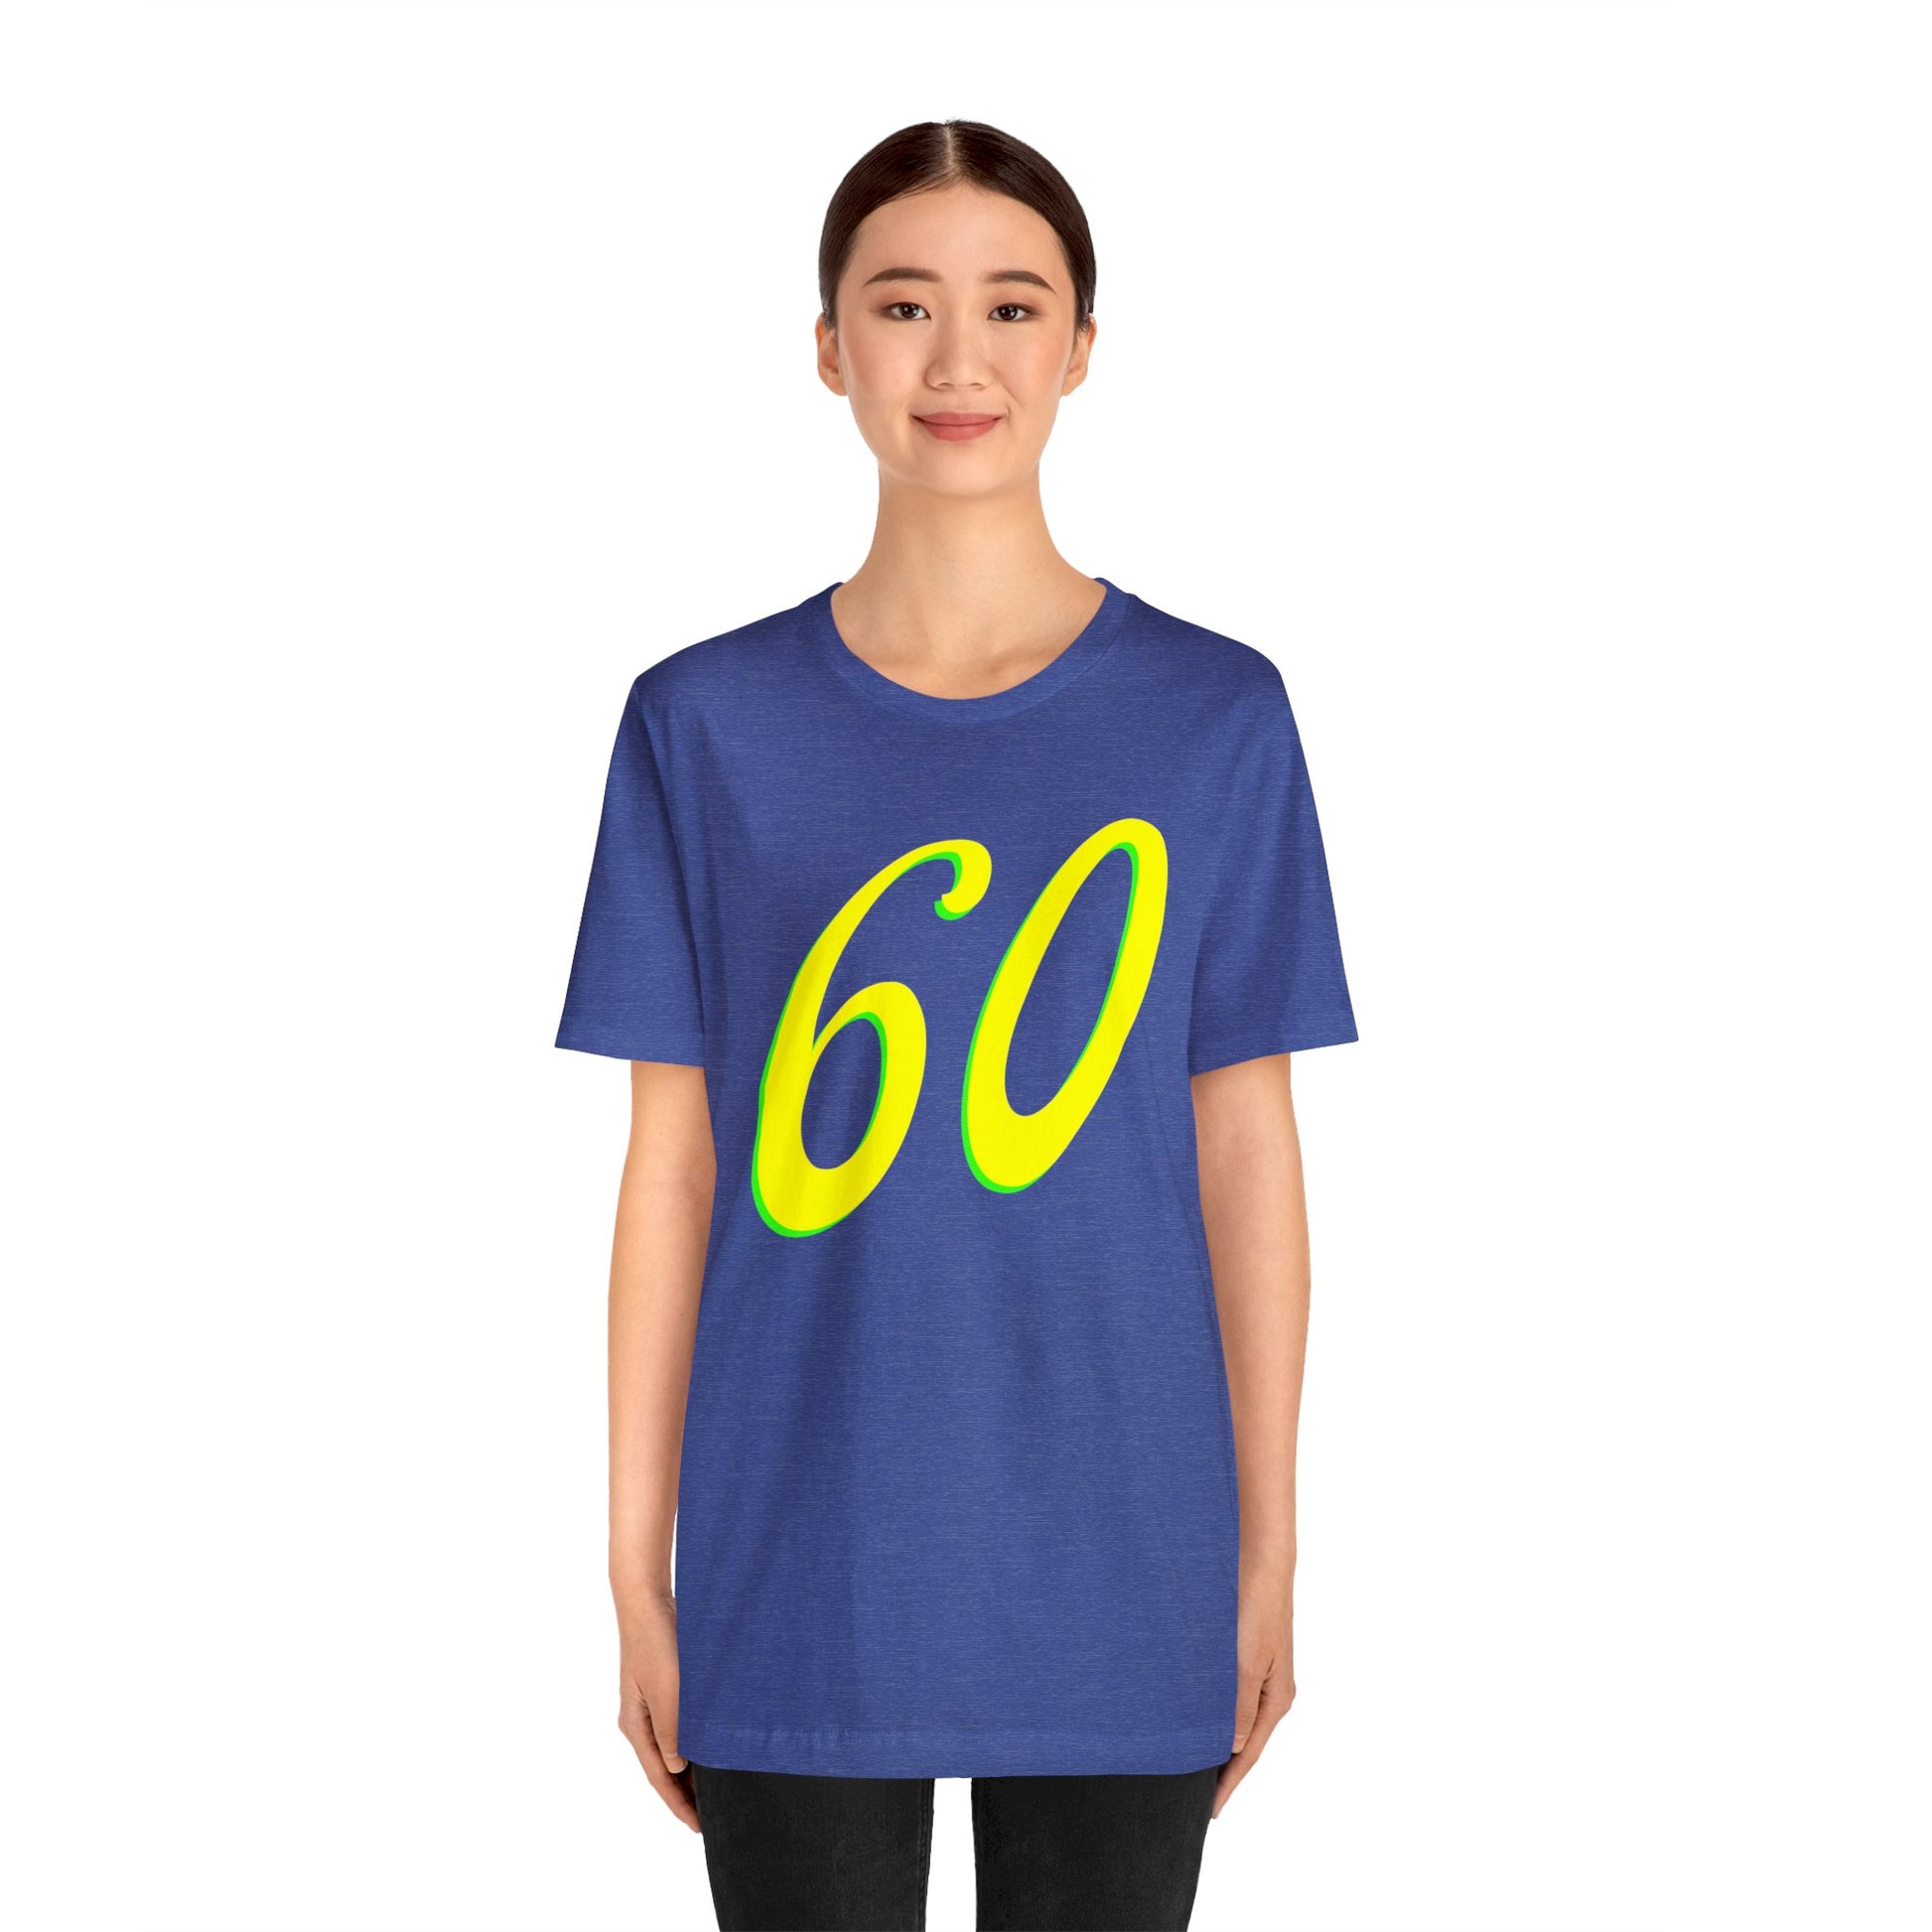 Number 60 Design - Soft Cotton Tee for birthdays and celebrations, Gift for friends and family, Multiple Options by clothezy.com in Dark Grey Heather Size Medium - Buy Now